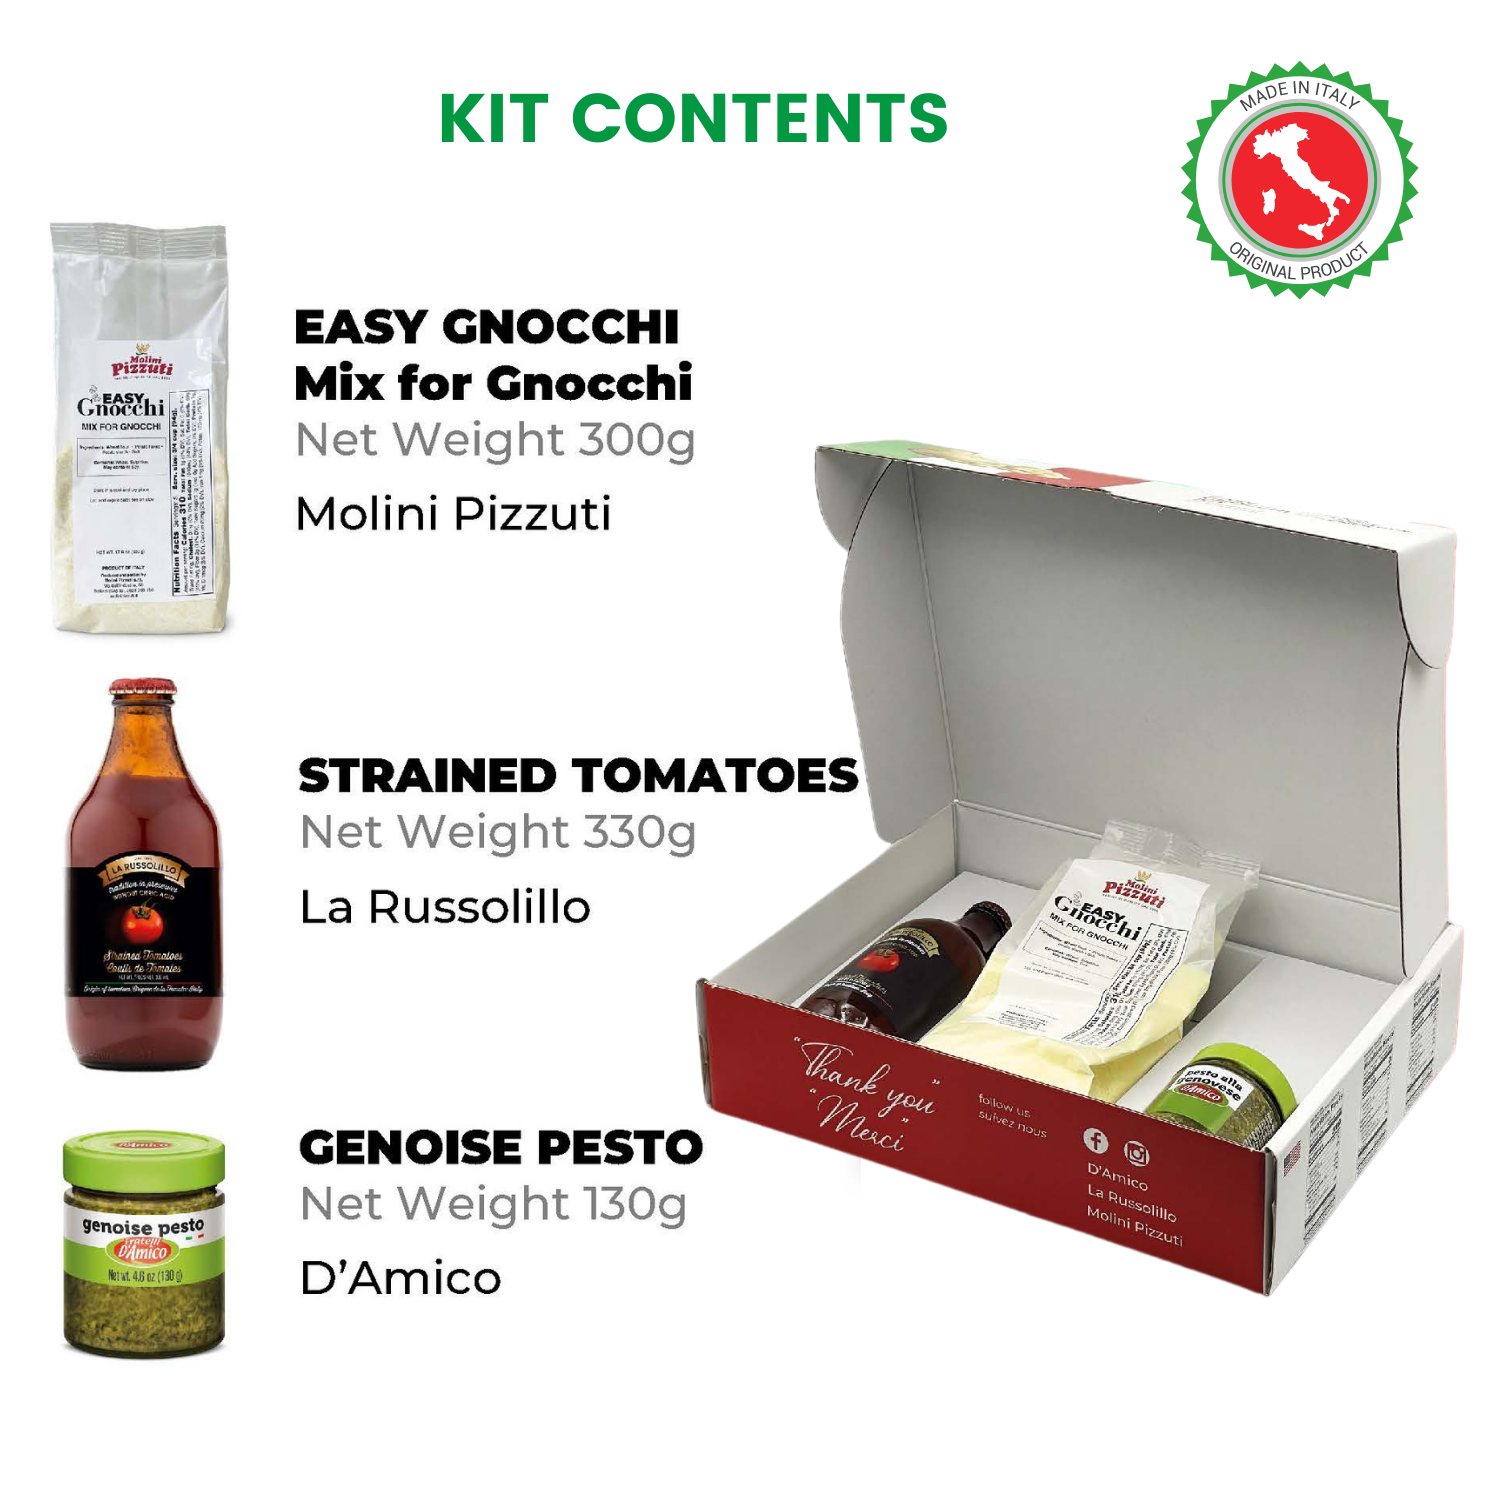 Fratelli D'Amico, Gnocchi Kit from Italy, Make Gnocchi in a few easy steps.